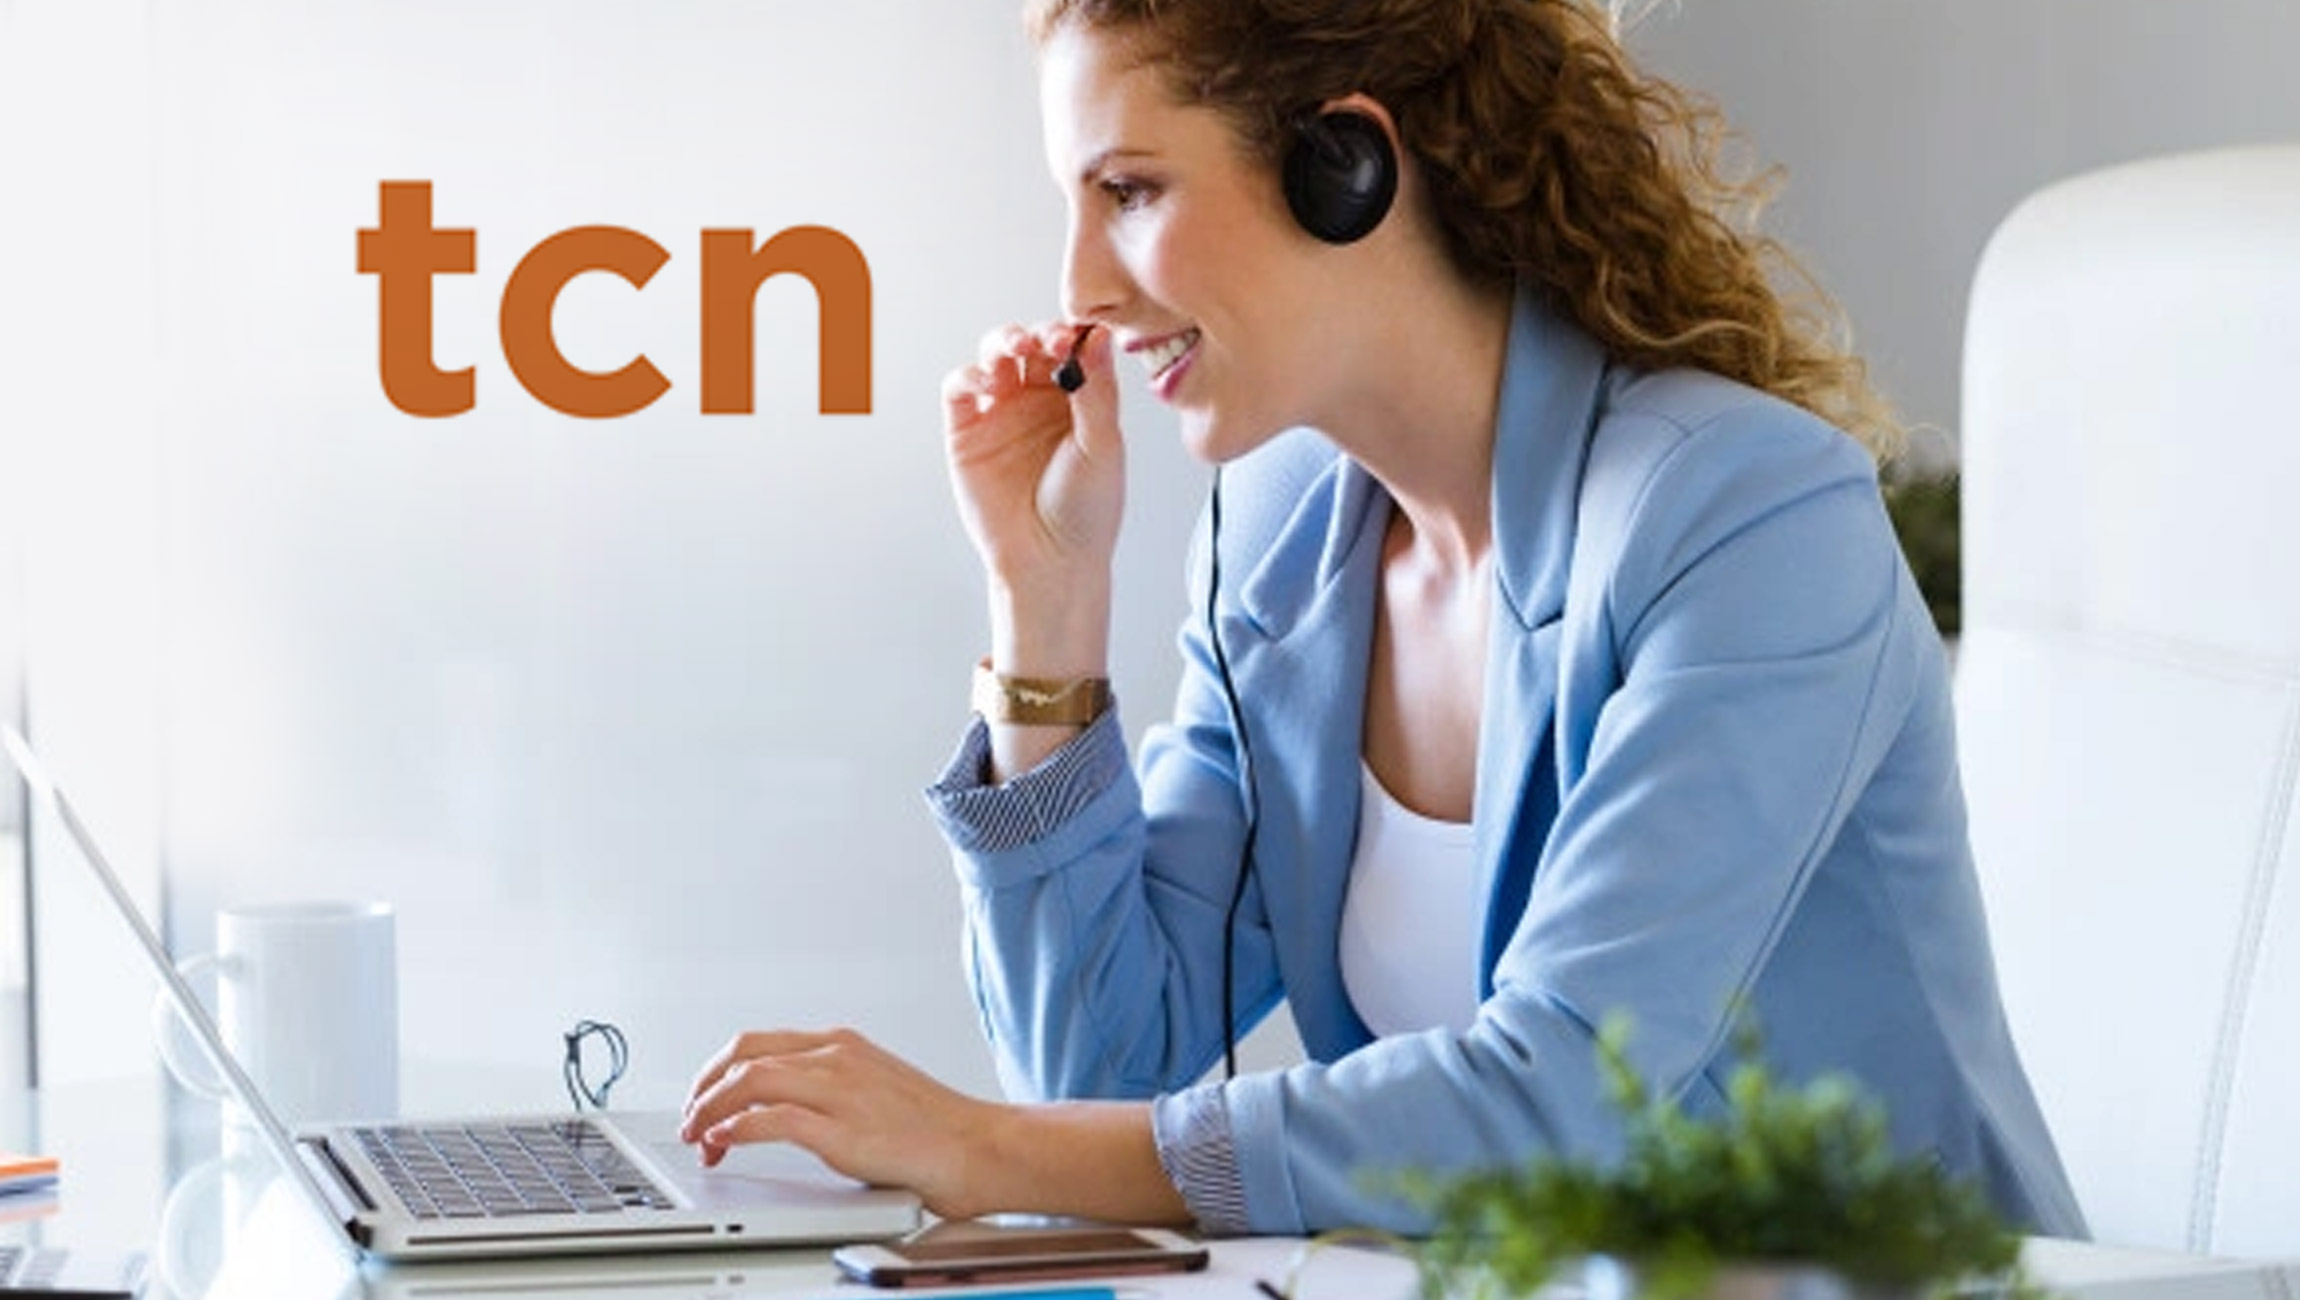 TCN Announces Performance Analytics and Reporting Enhancements for its Advanced Contact Center Platform, TCN Operator